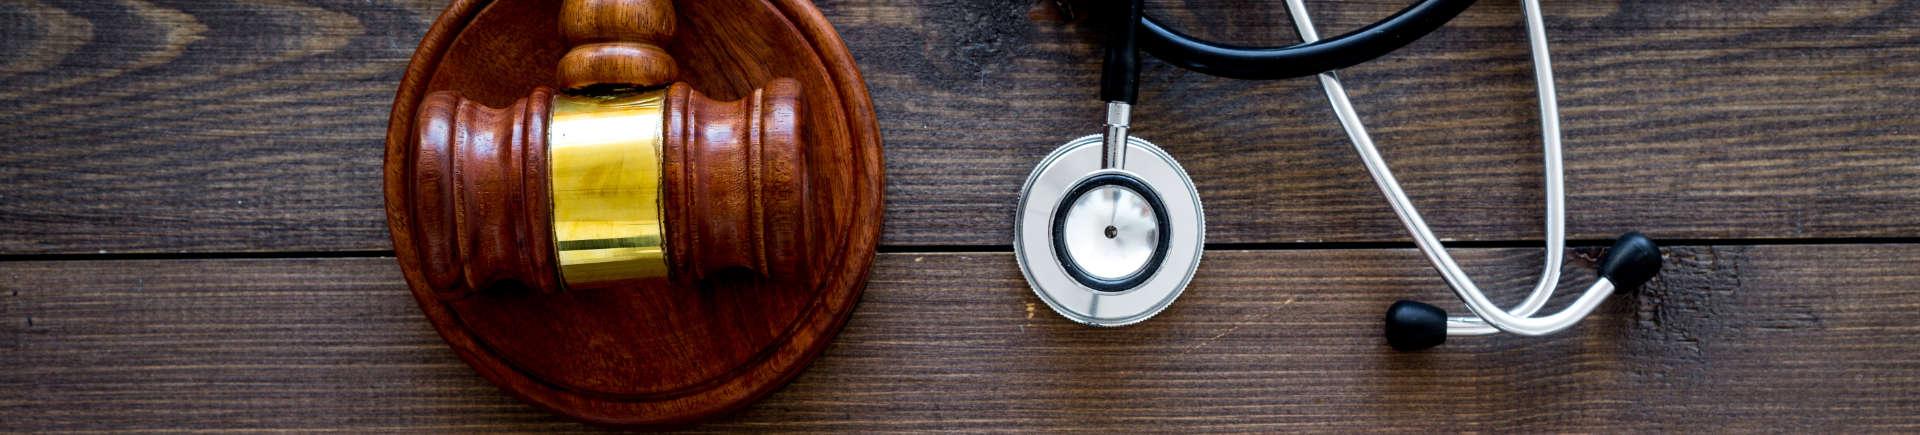 Judge's gavel and a stethoscope